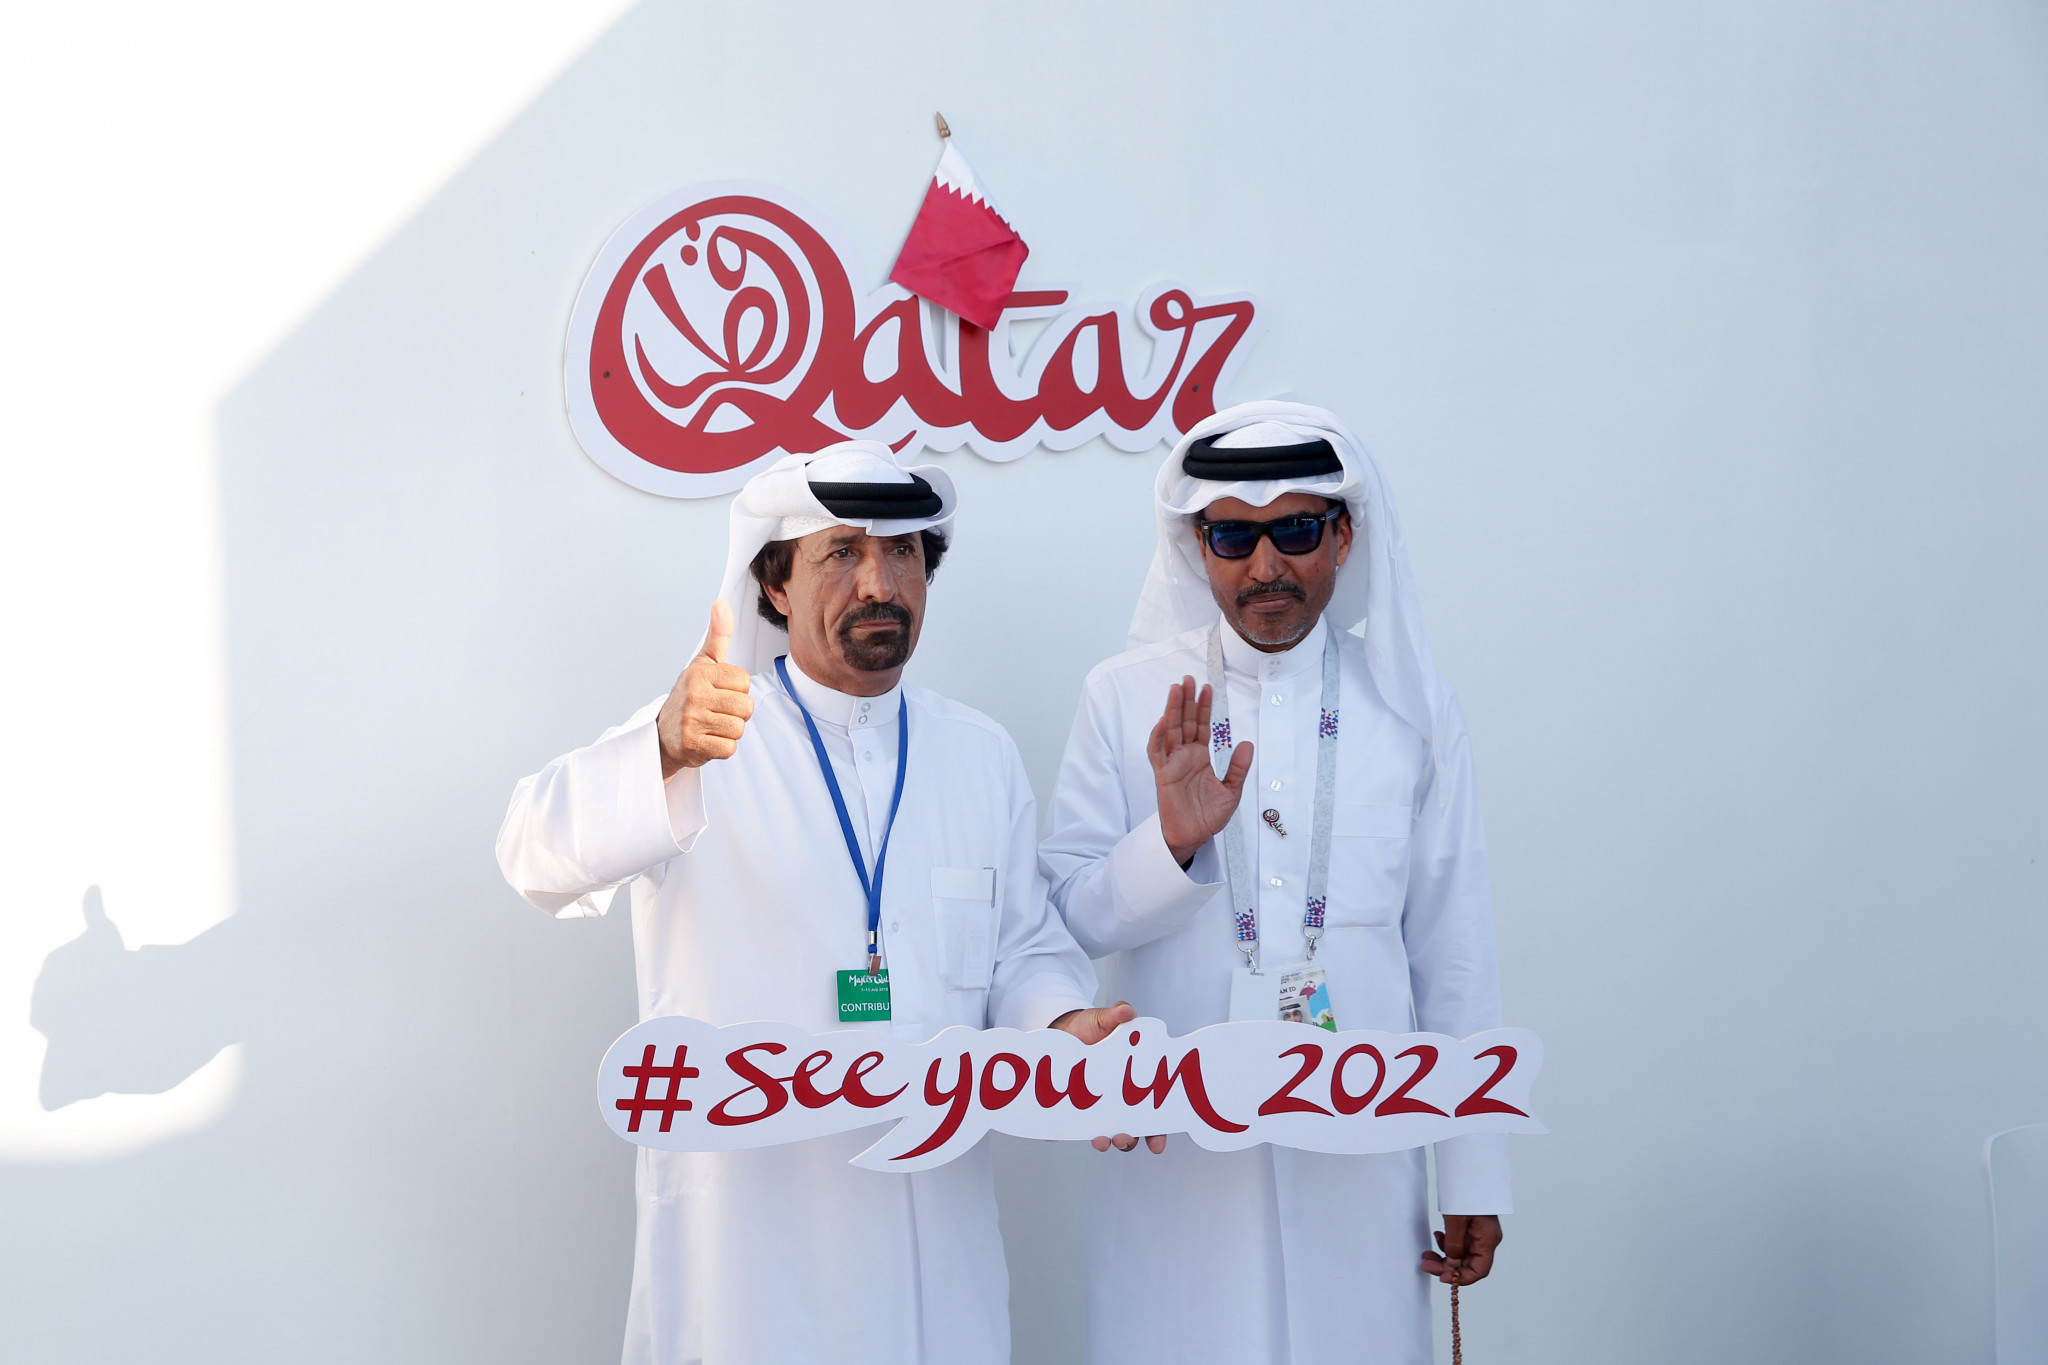 A "black operations" campaign was allegedly conducted by the Qatar 2022 bid team in an attempt to discredit and sabotage their rivals ©Getty Images